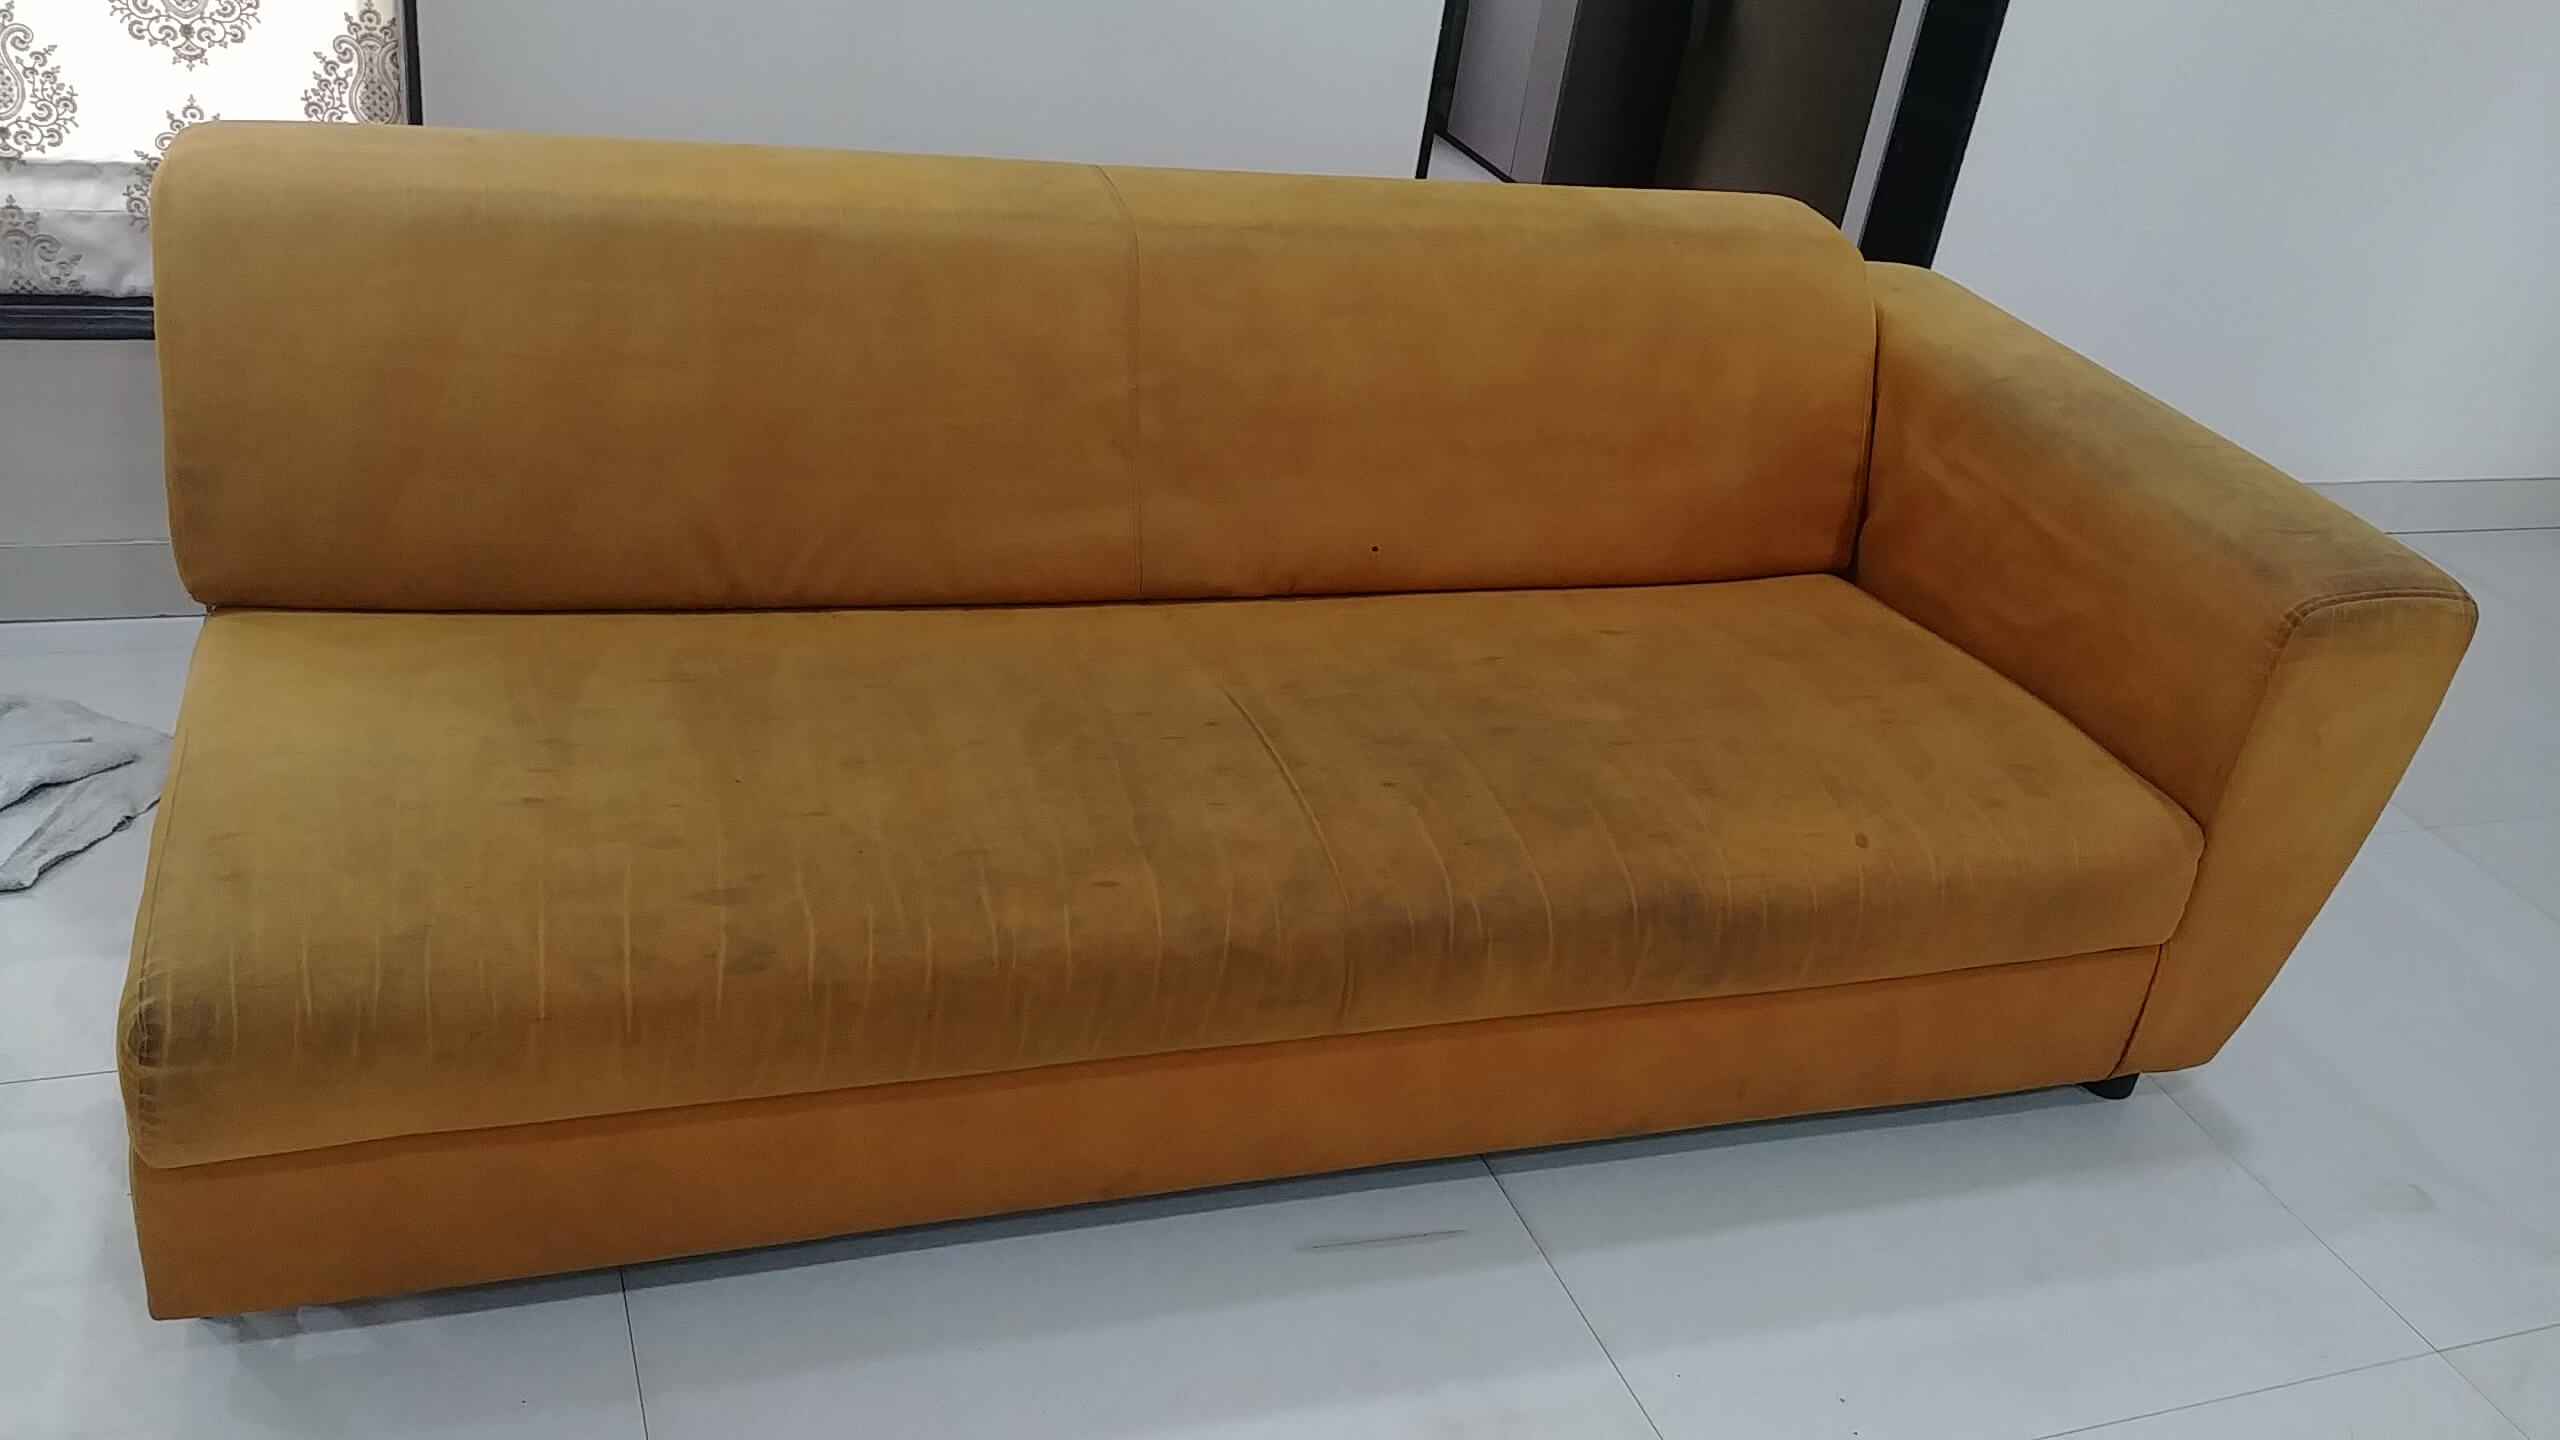 01 Fabric sofa before cleaning.